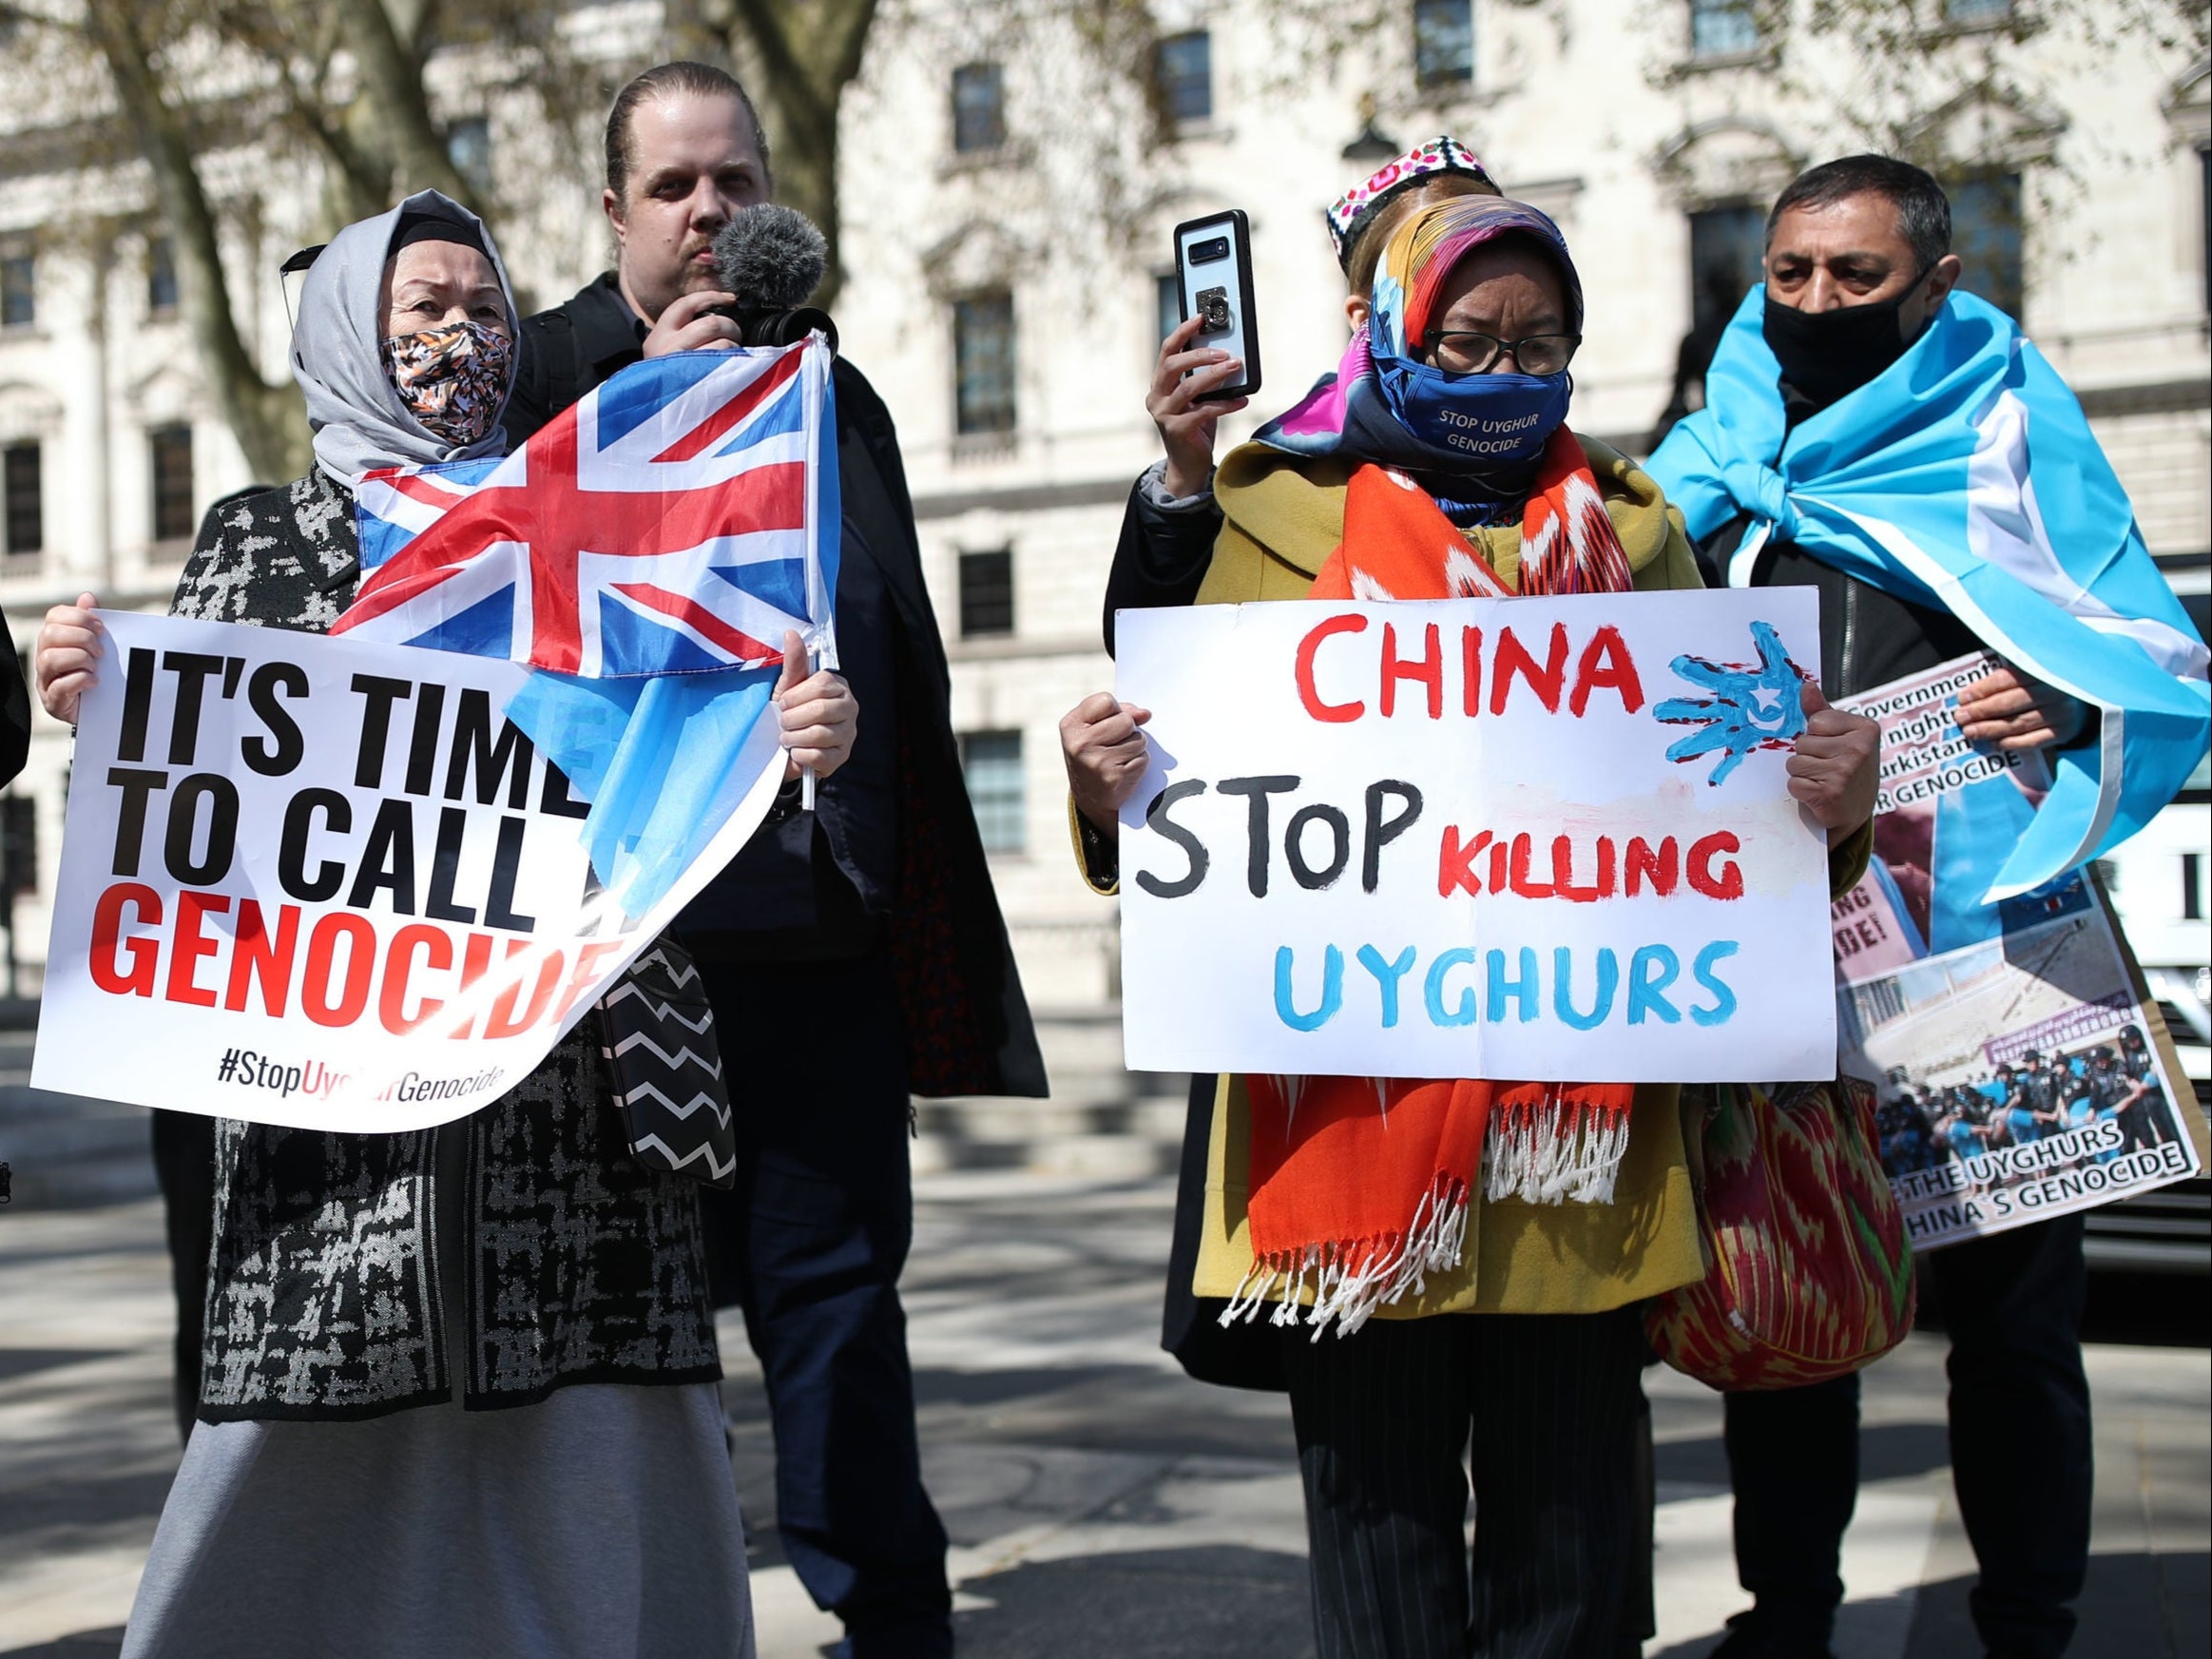 People protest in London against the atrocities carried out by China in Xinjiang province.